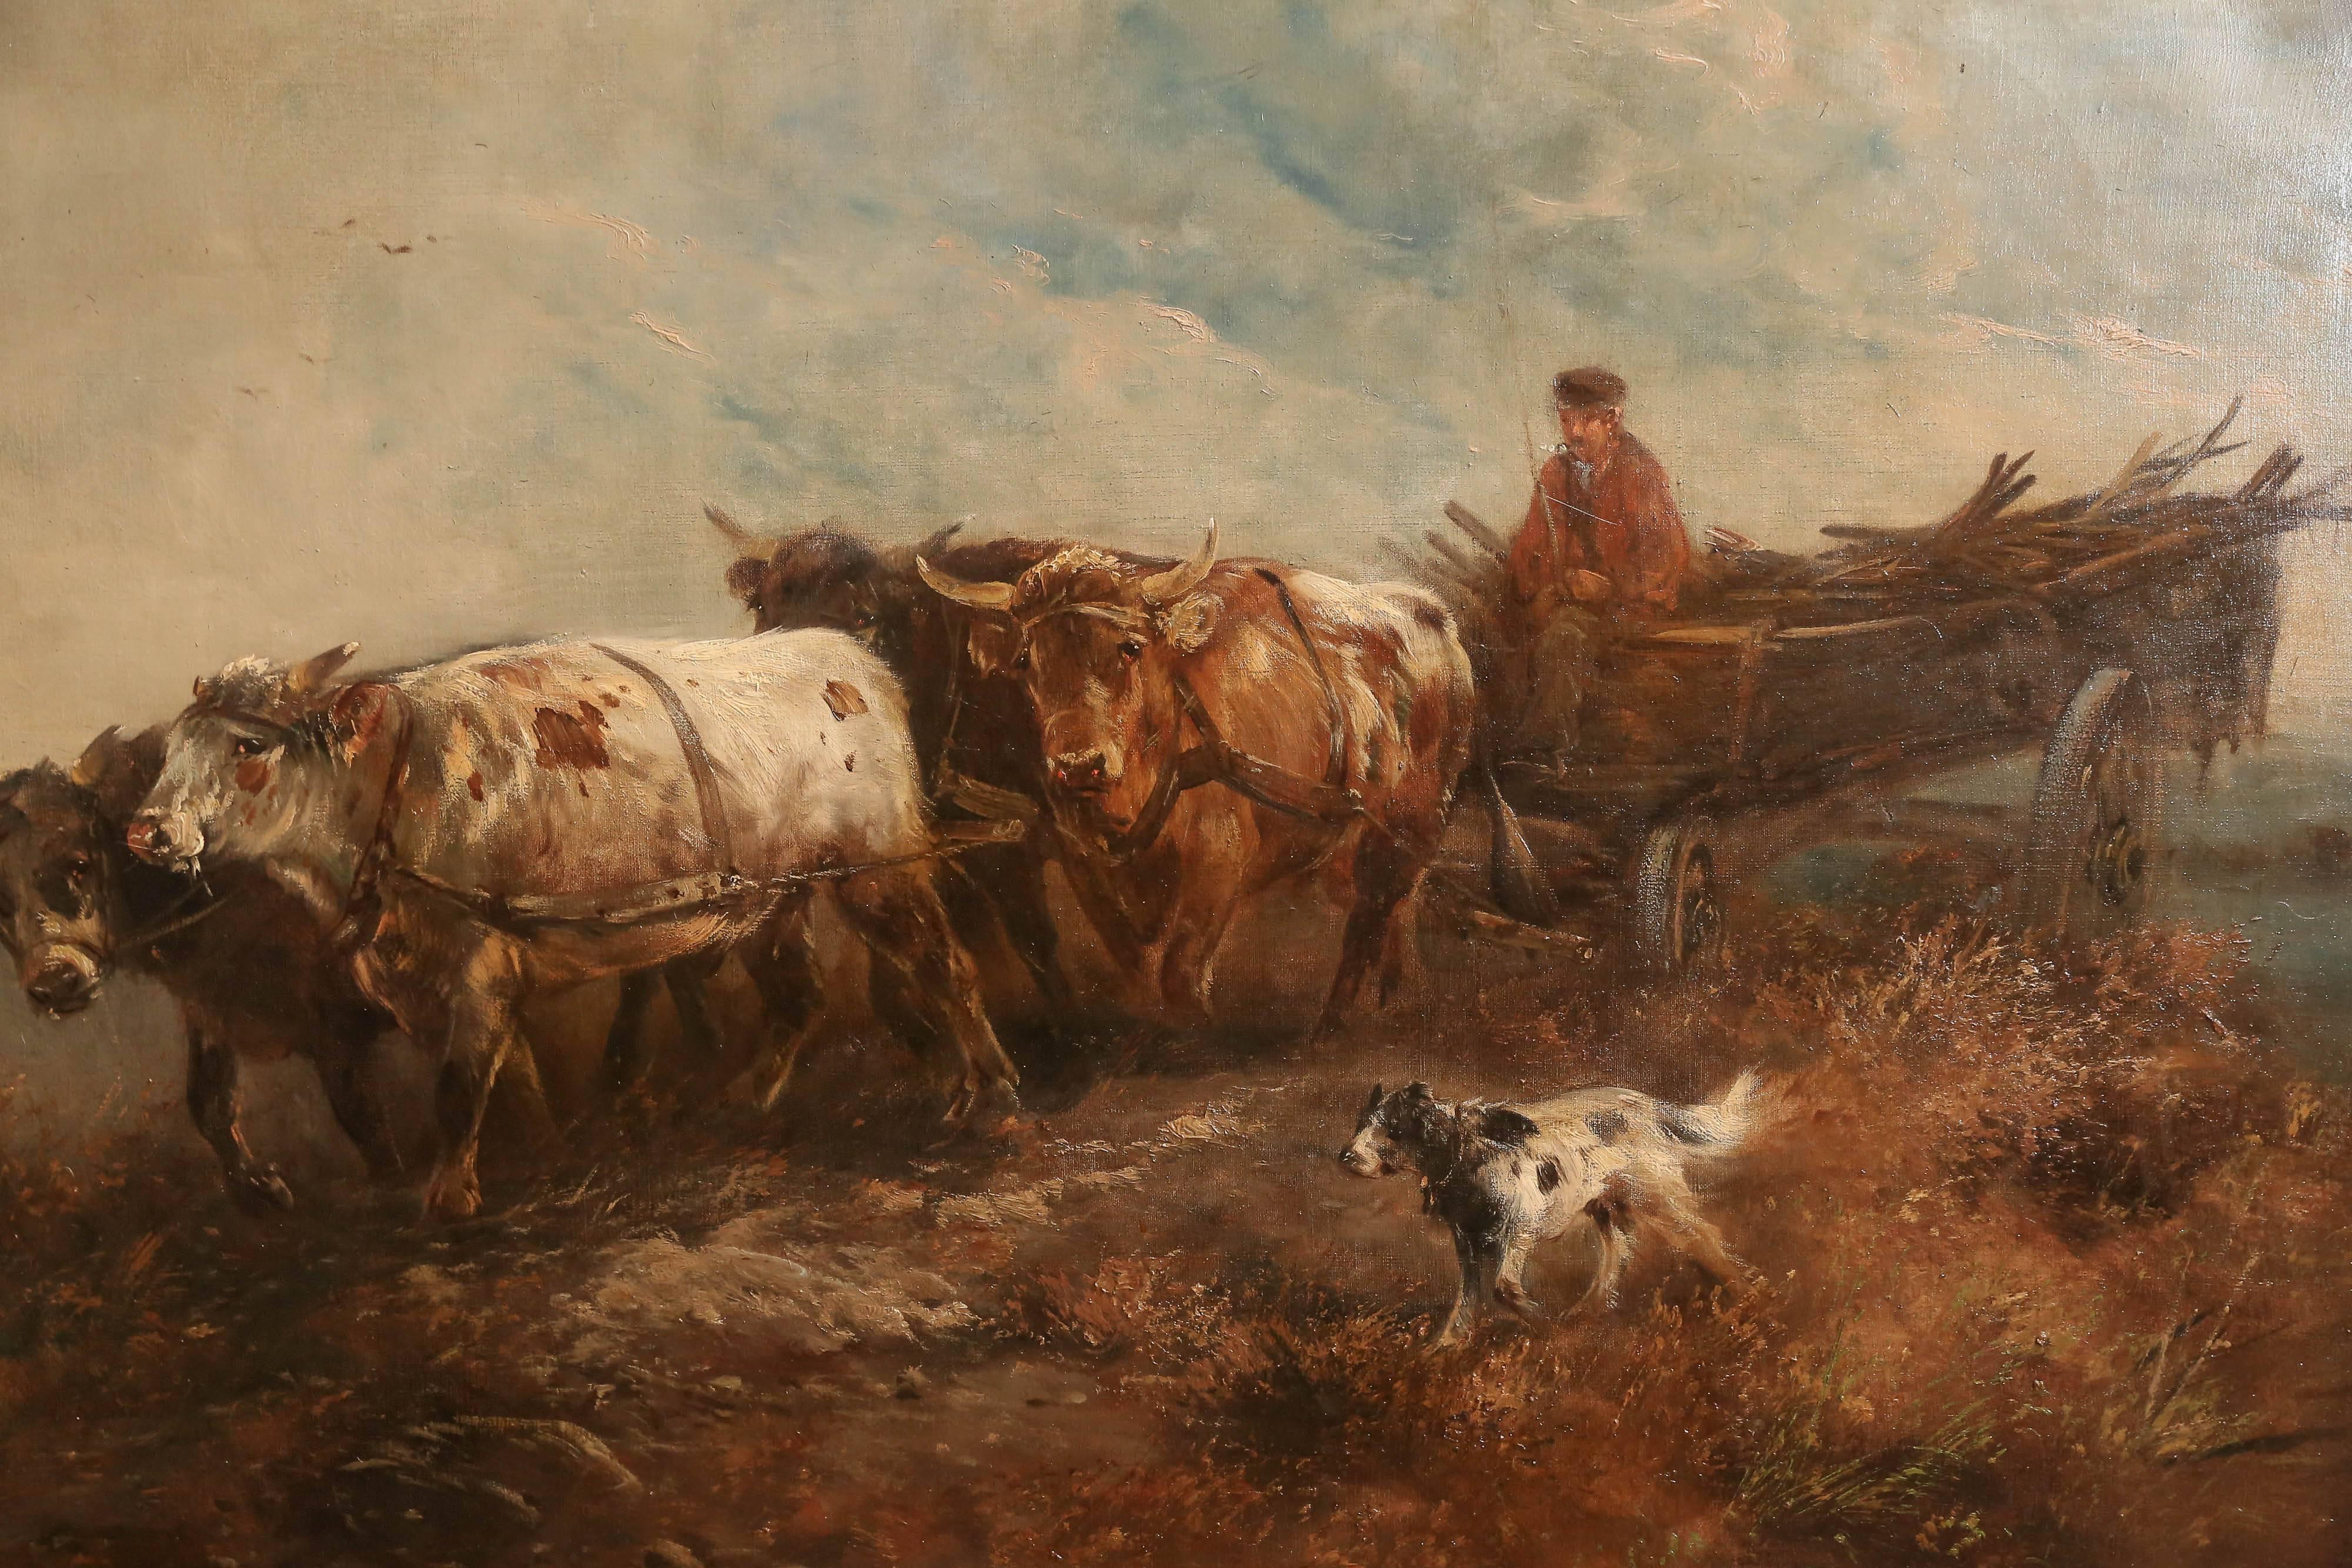 Oil painting by Henry Schouten 
A Belguim artist that was known for painting farm animals
And scenery. This painting depicting four oxen pulling a
Cart and driver with a cart filled with wood. The foreground 
Has a black a white spotted dog it